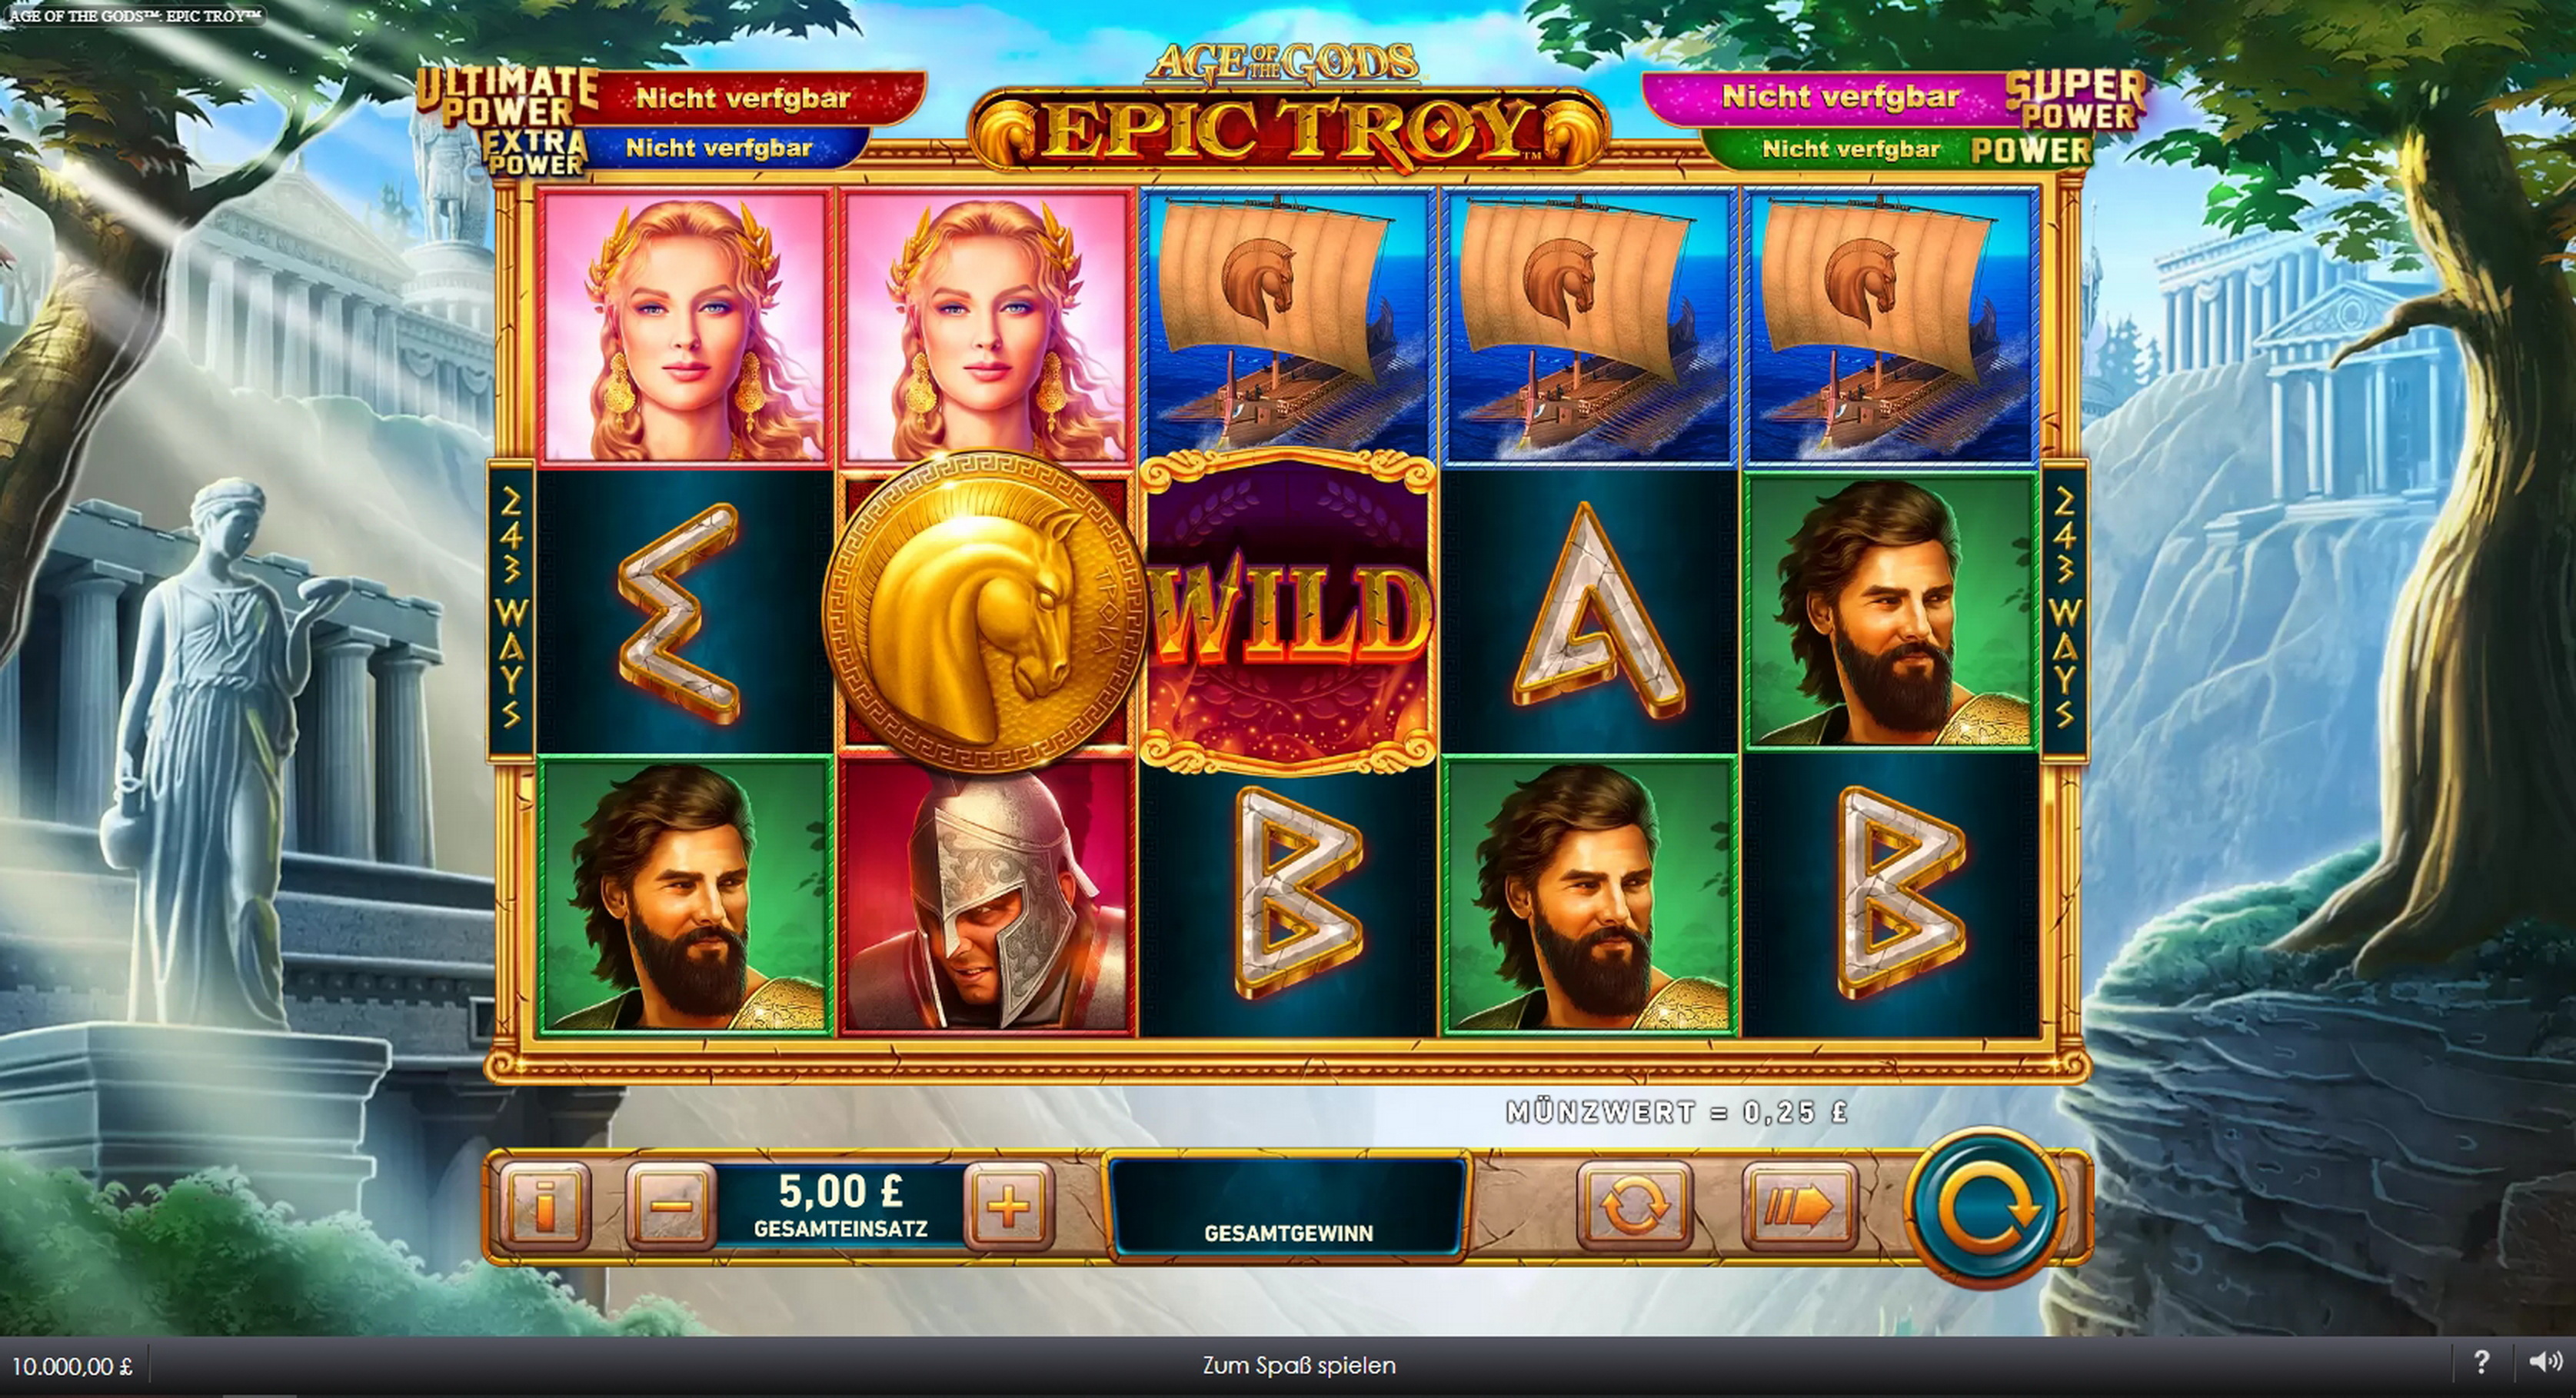 Reels in Age of the Gods Epic Troy Slot Game by Playtech